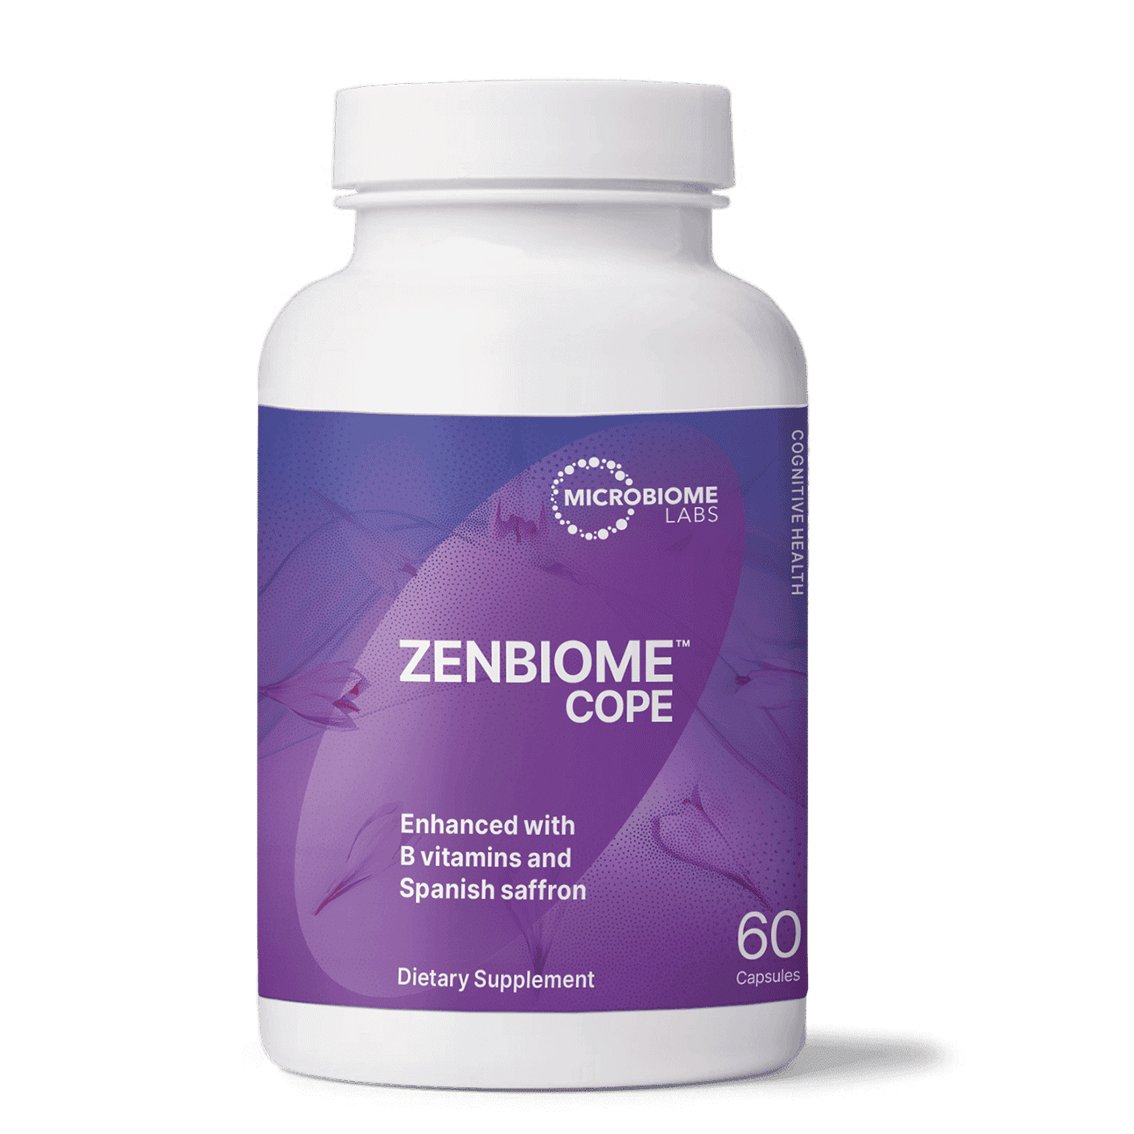 ZenBiome Cope by Microbiome Labs New Branding Bottle